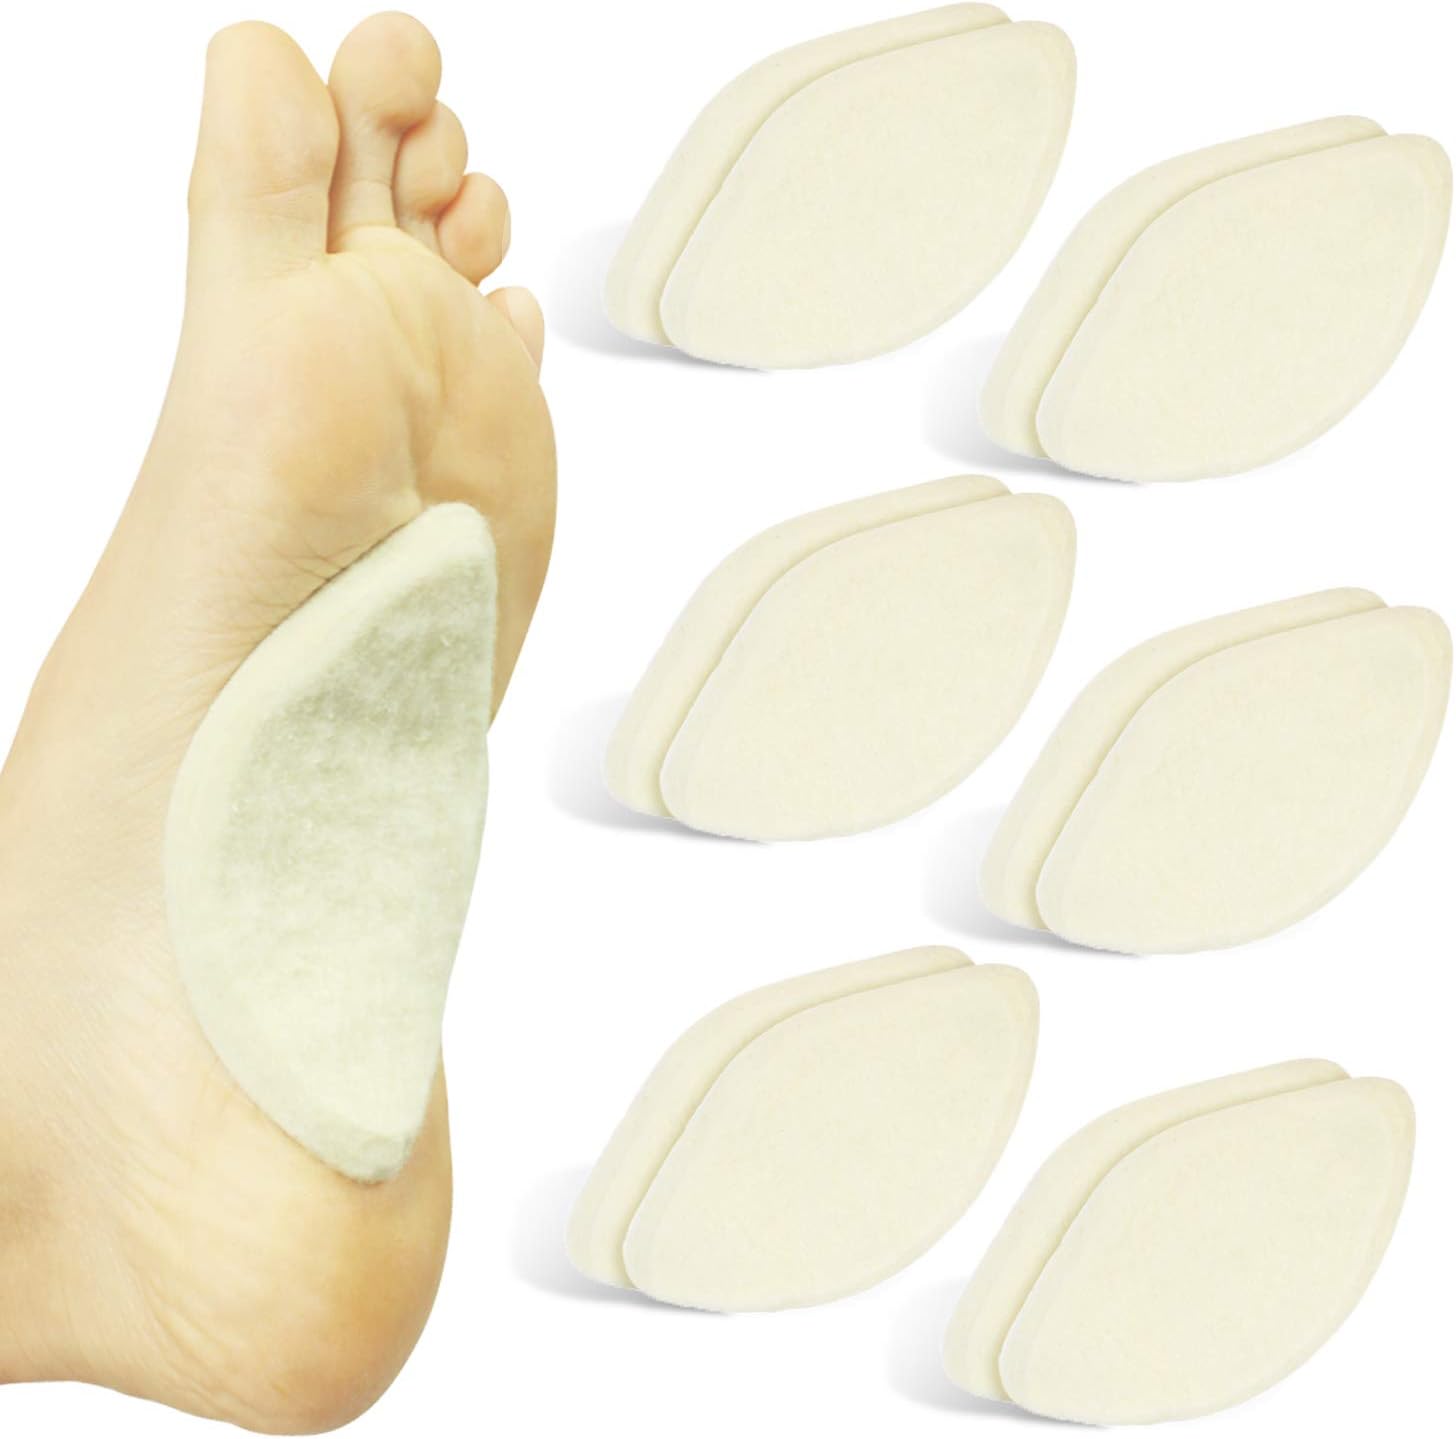 ViveSole Arch Support Pads (12 Pack) Adhesive Felt [...]